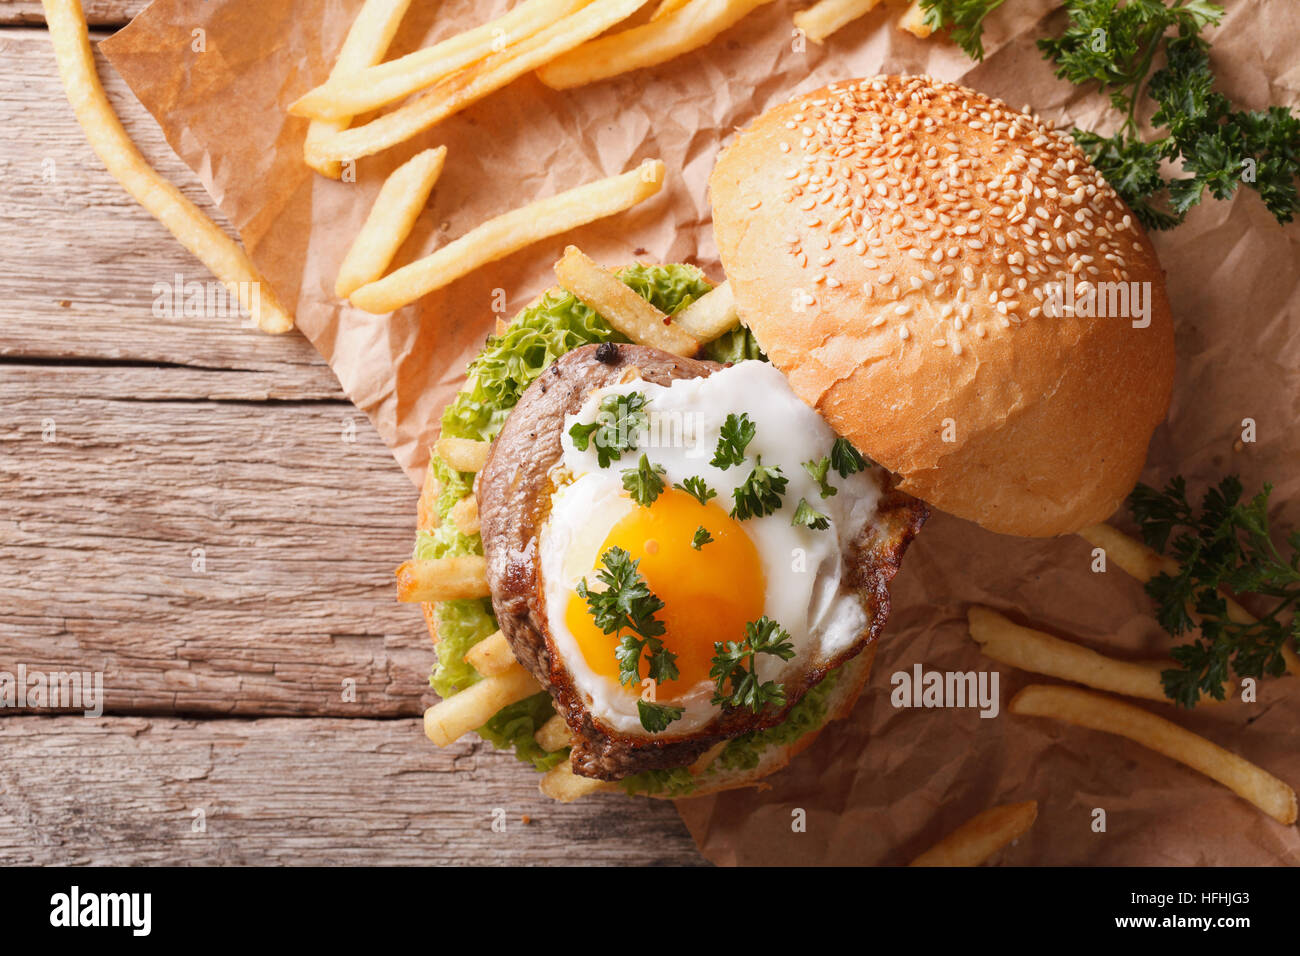 sandwich with grilled meat, a fried egg and French fries. horizontal view from above Stock Photo